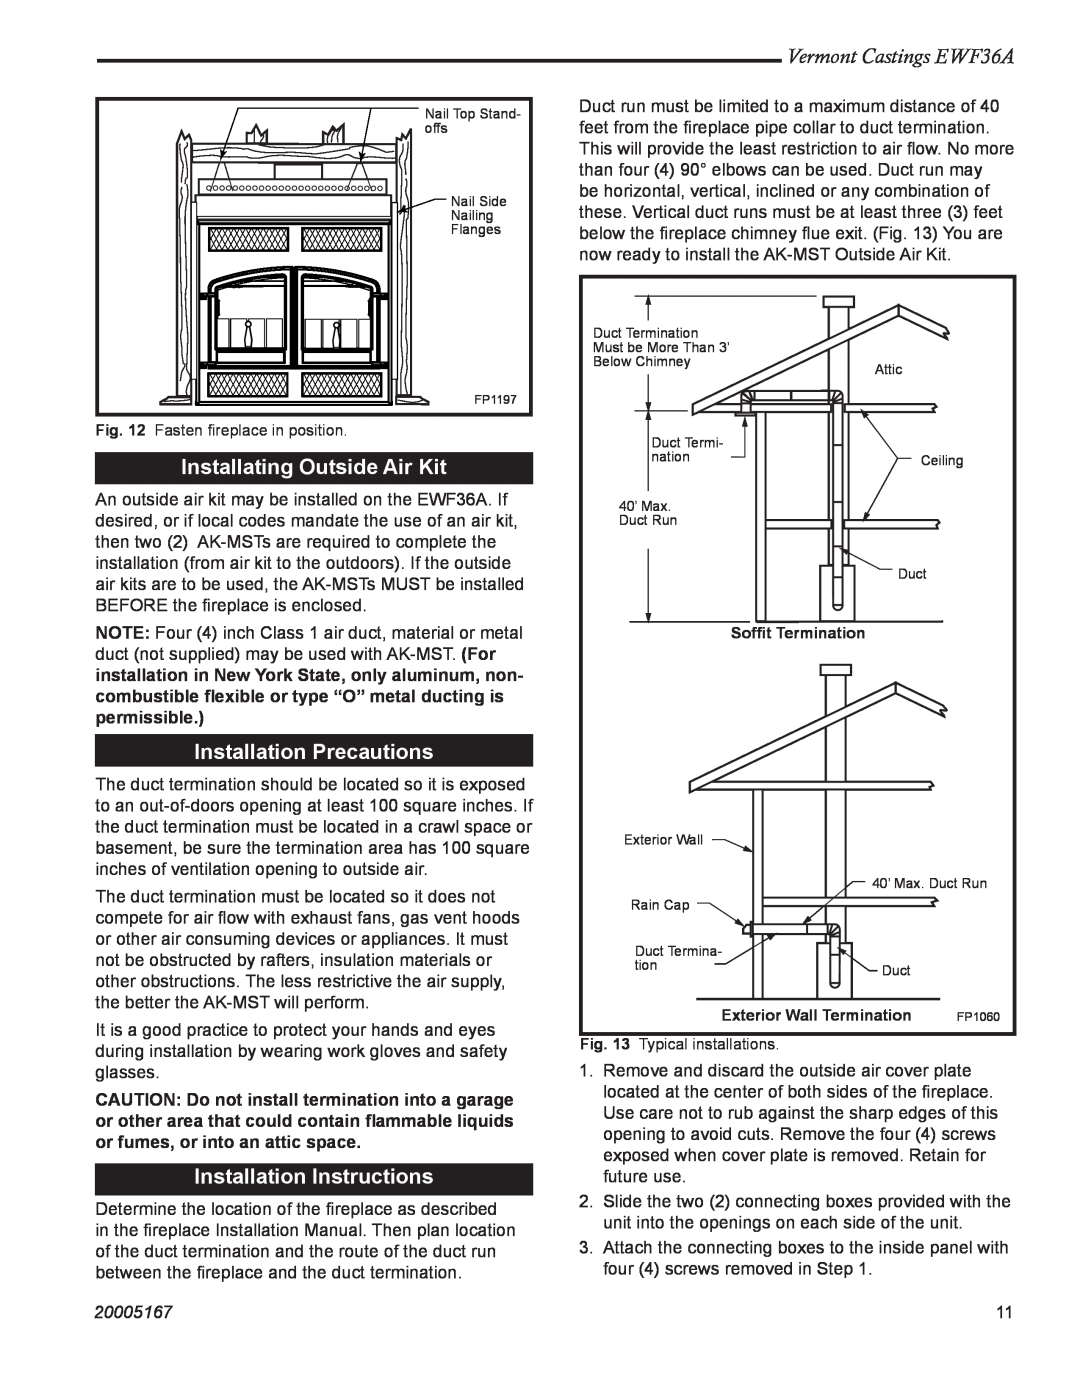 Vermont Casting EWF36A Installating Outside Air Kit, Installation Precautions, Installation Instructions, 20005167 